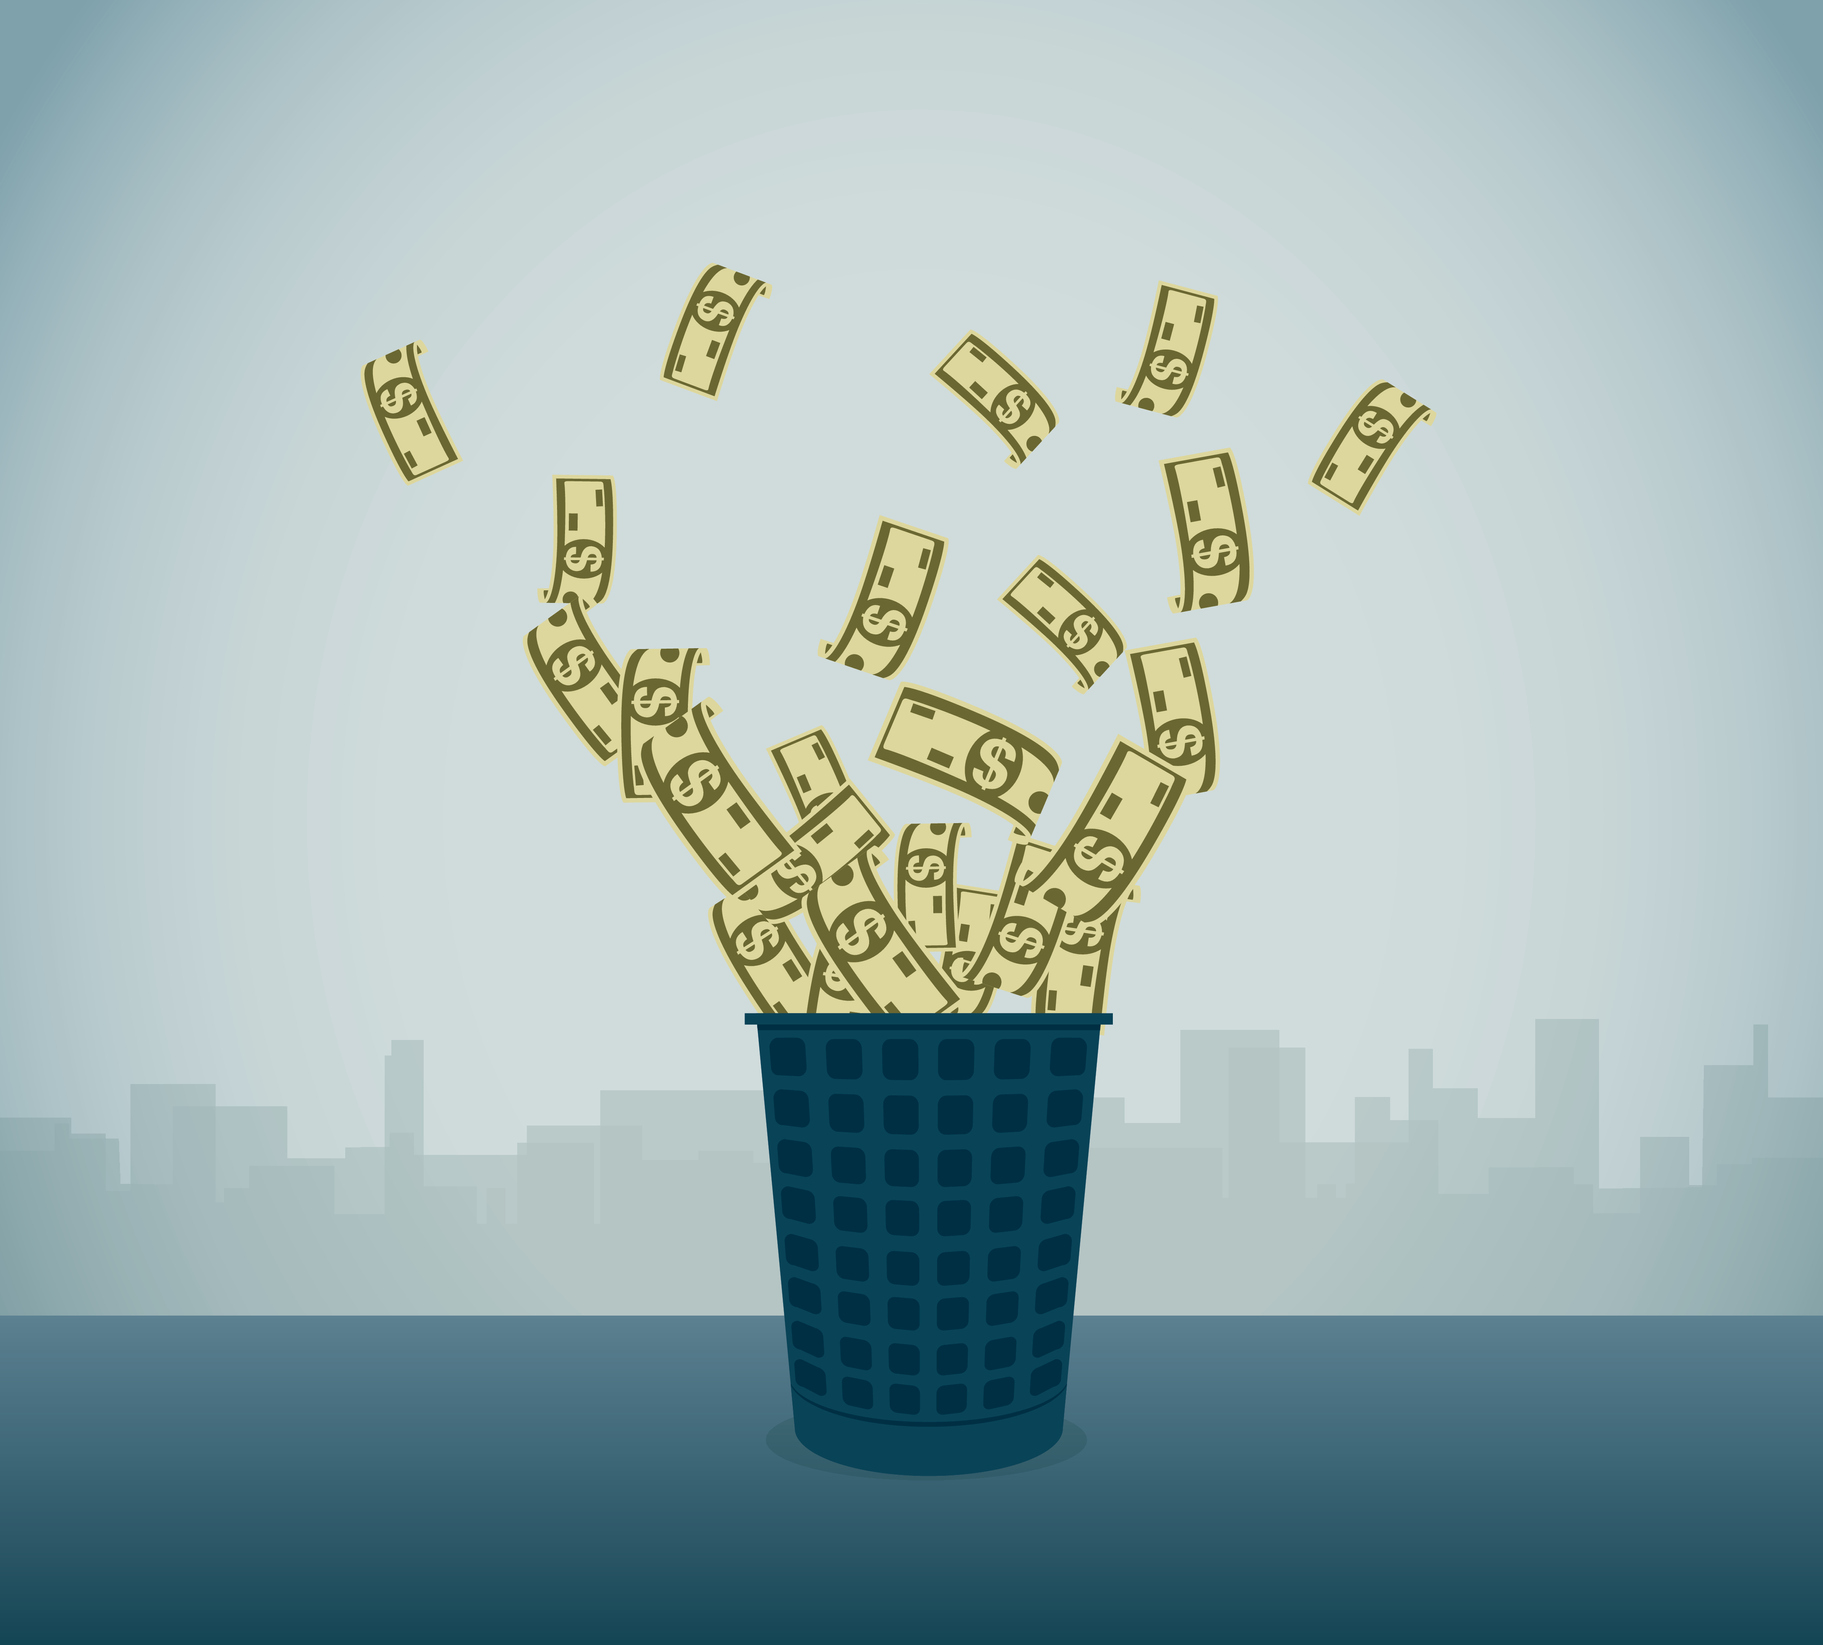 An illustration of money flying out of a trash can.